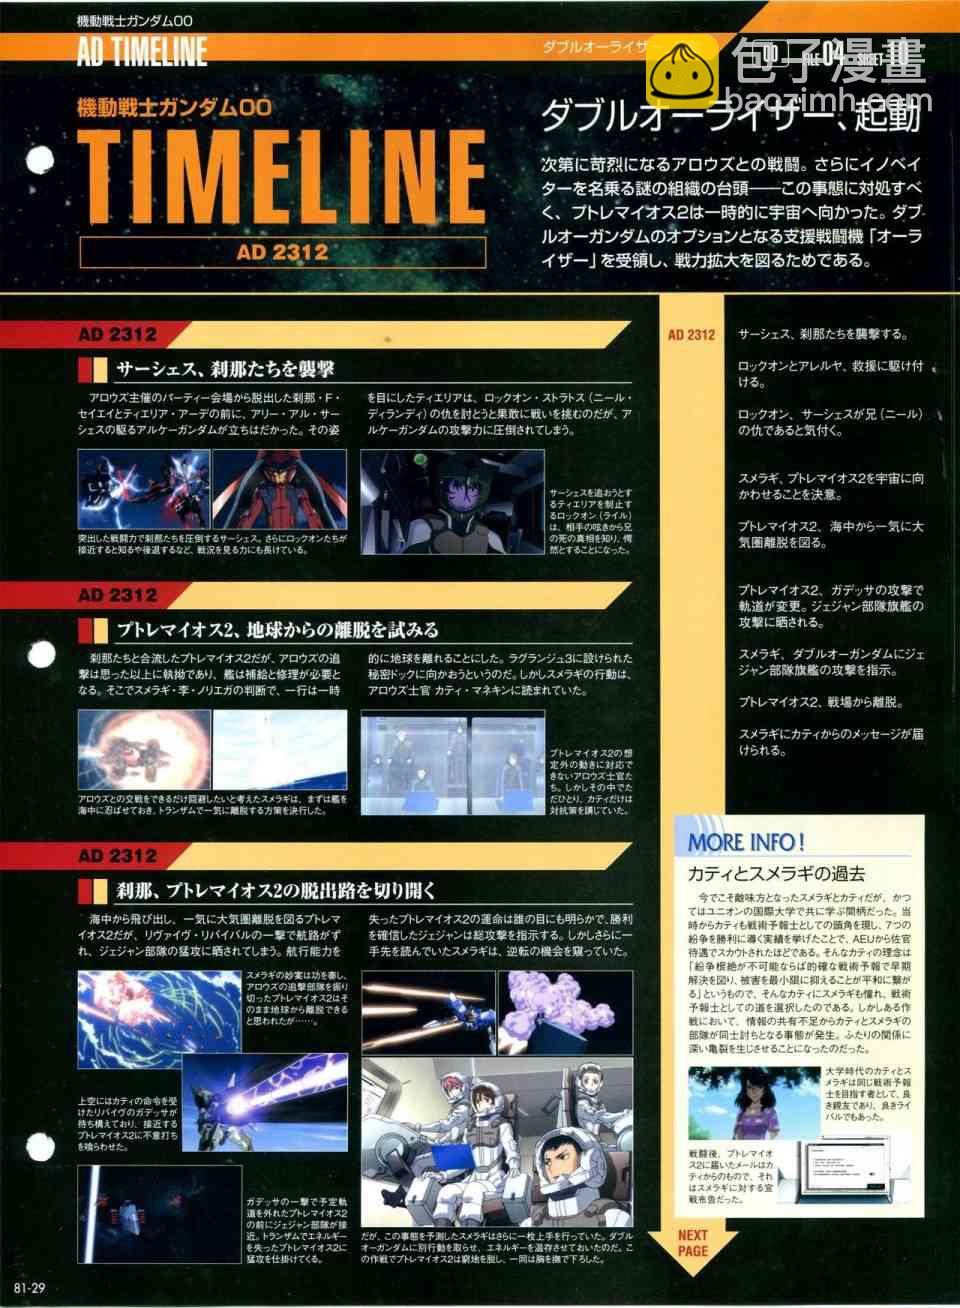 The Official Gundam Perfect File  - 第81-90話(1/7) - 5